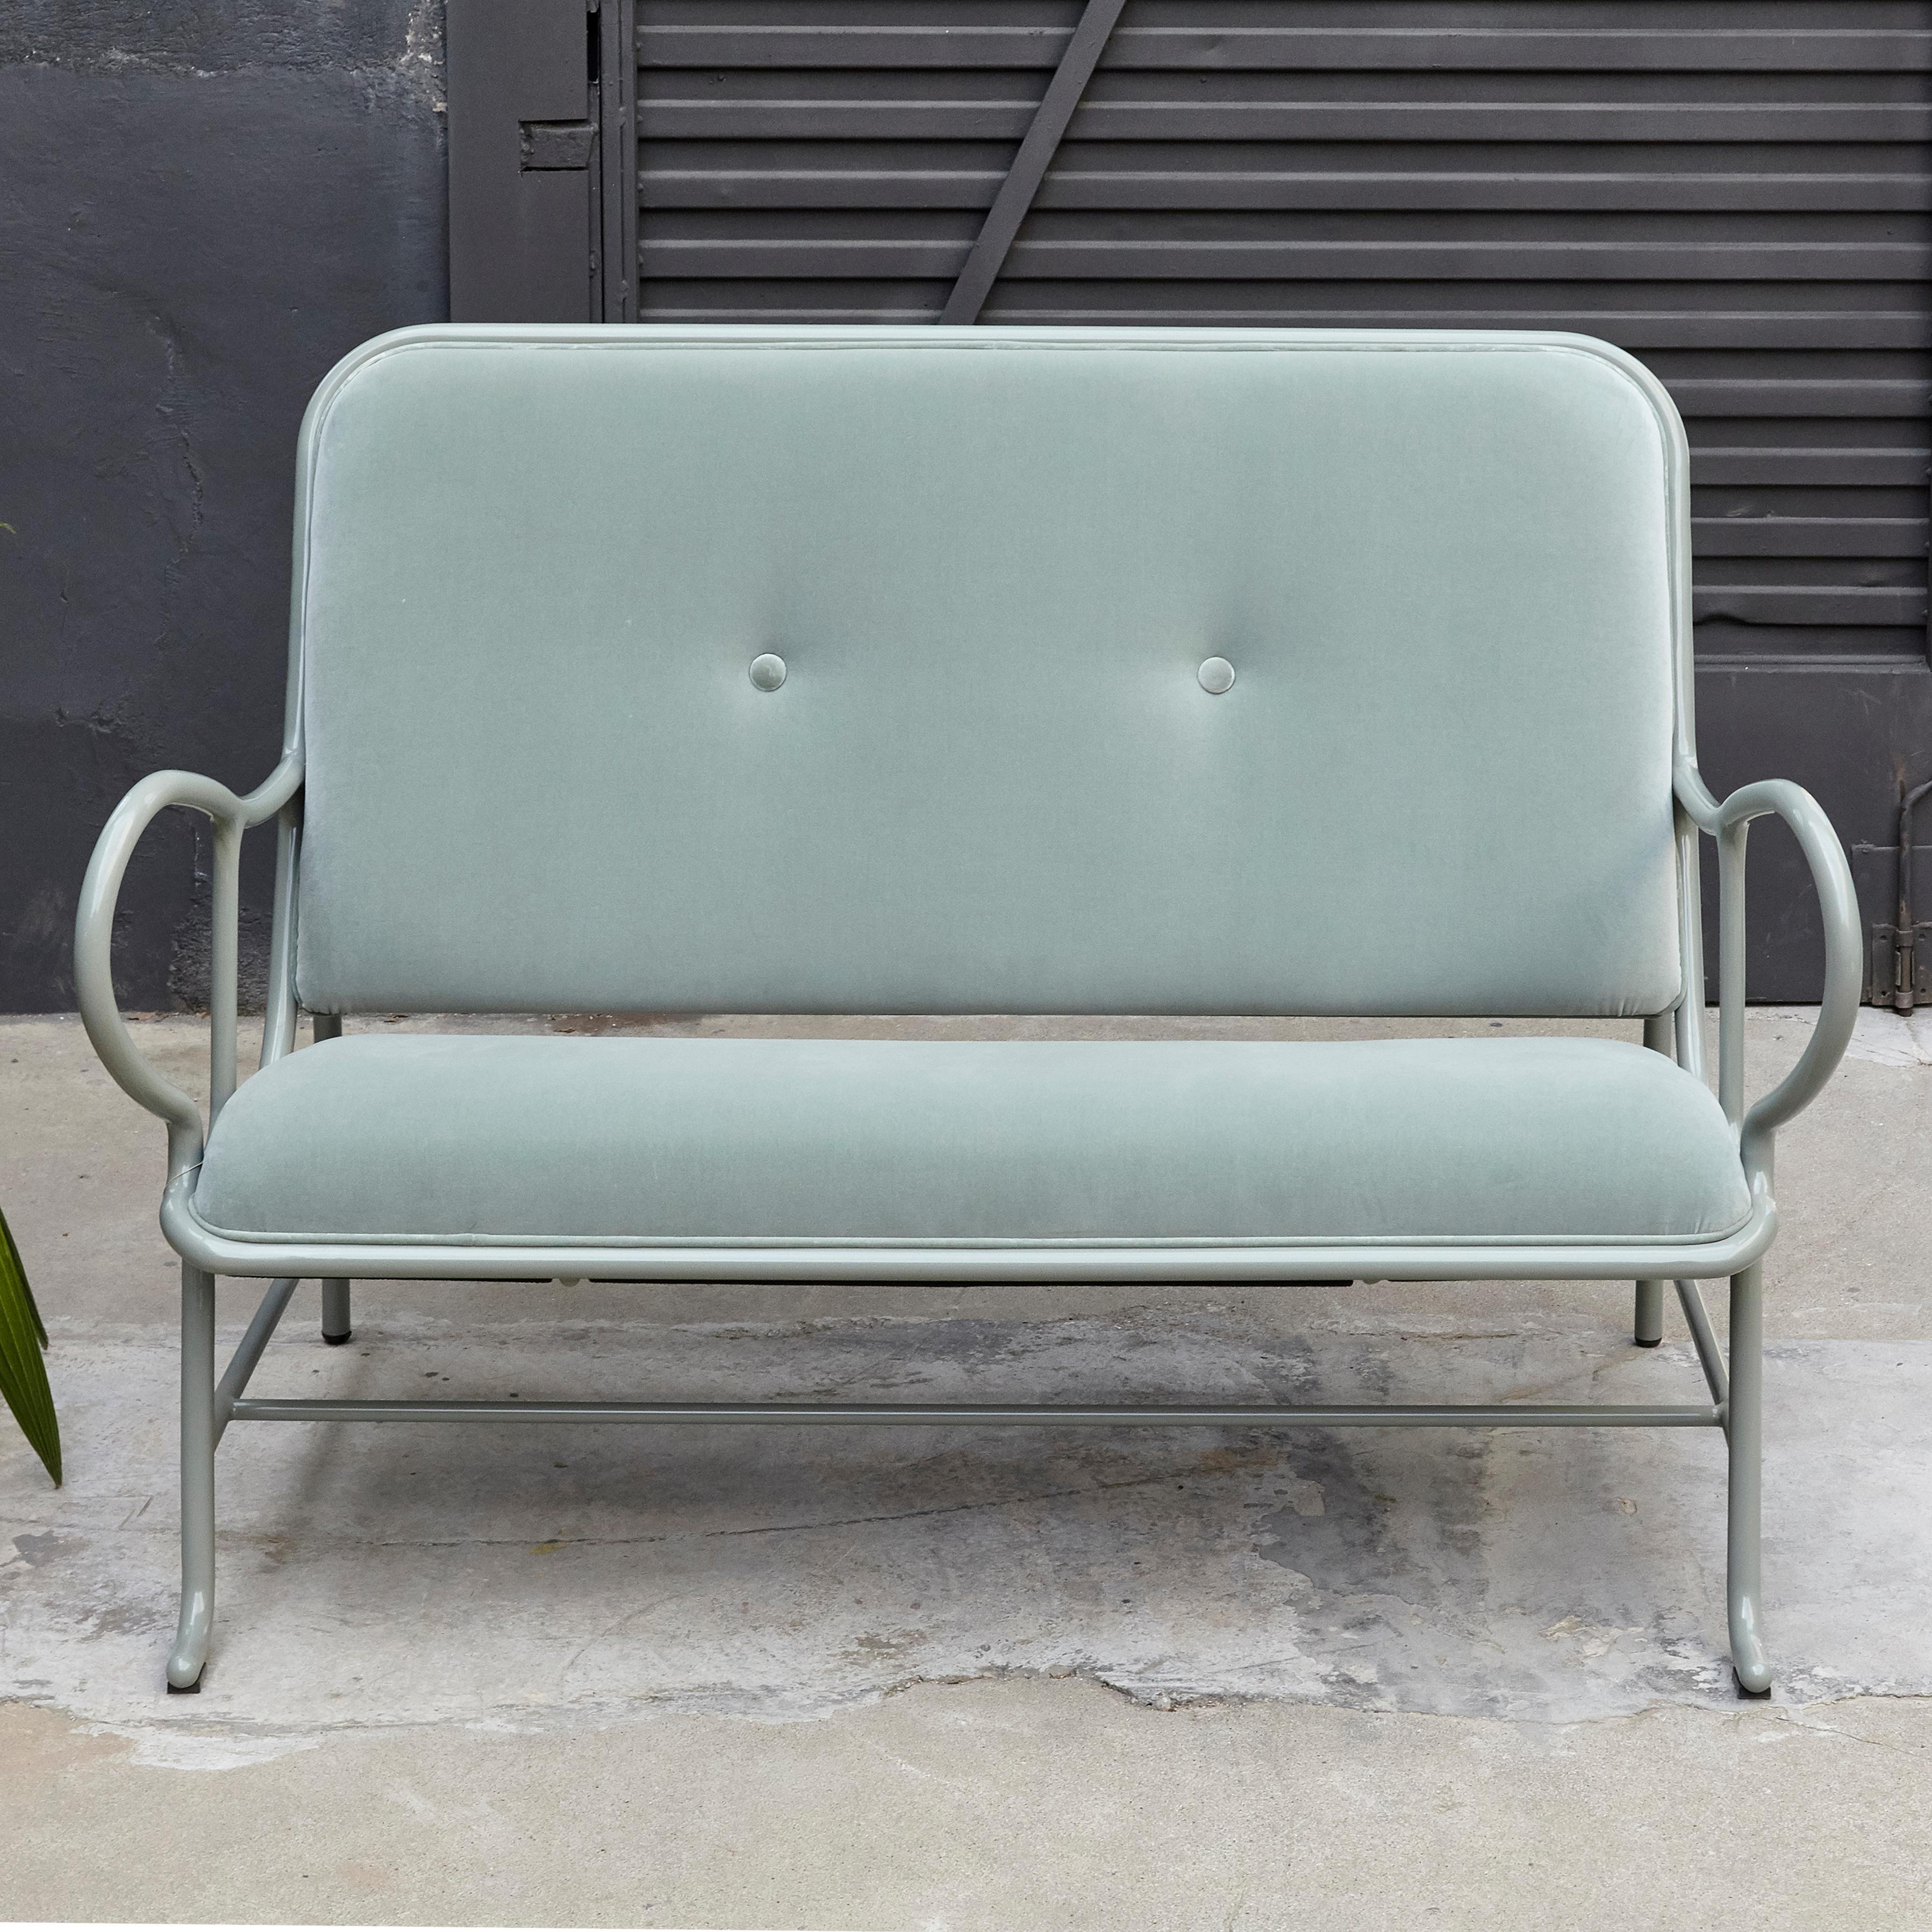 The Gardenias collection is the second largest collection by Jaime Hayon for BD.
Structure made of cast and extruded aluminium painted and green velvet upholstery.

In good condition, preserving a beautiful patina with minor wear consistent of